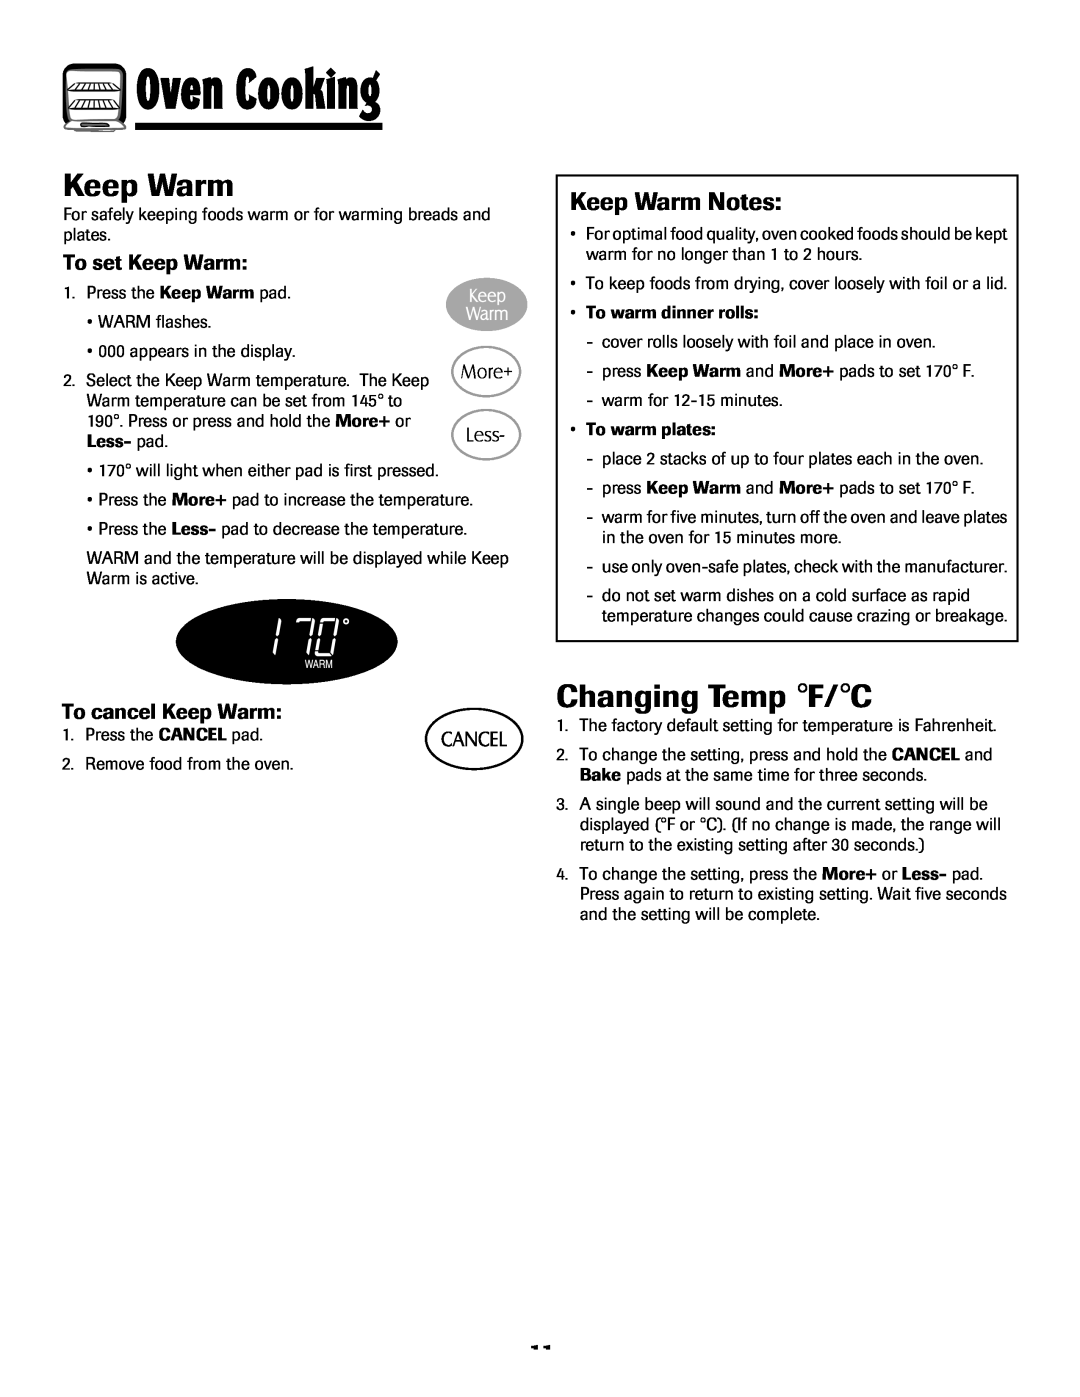 Maytag MES5752BAS, 8113P768-60 Changing Temp F/C, Keep Warm Notes, To set Keep Warm, To cancel Keep Warm, Oven Cooking 